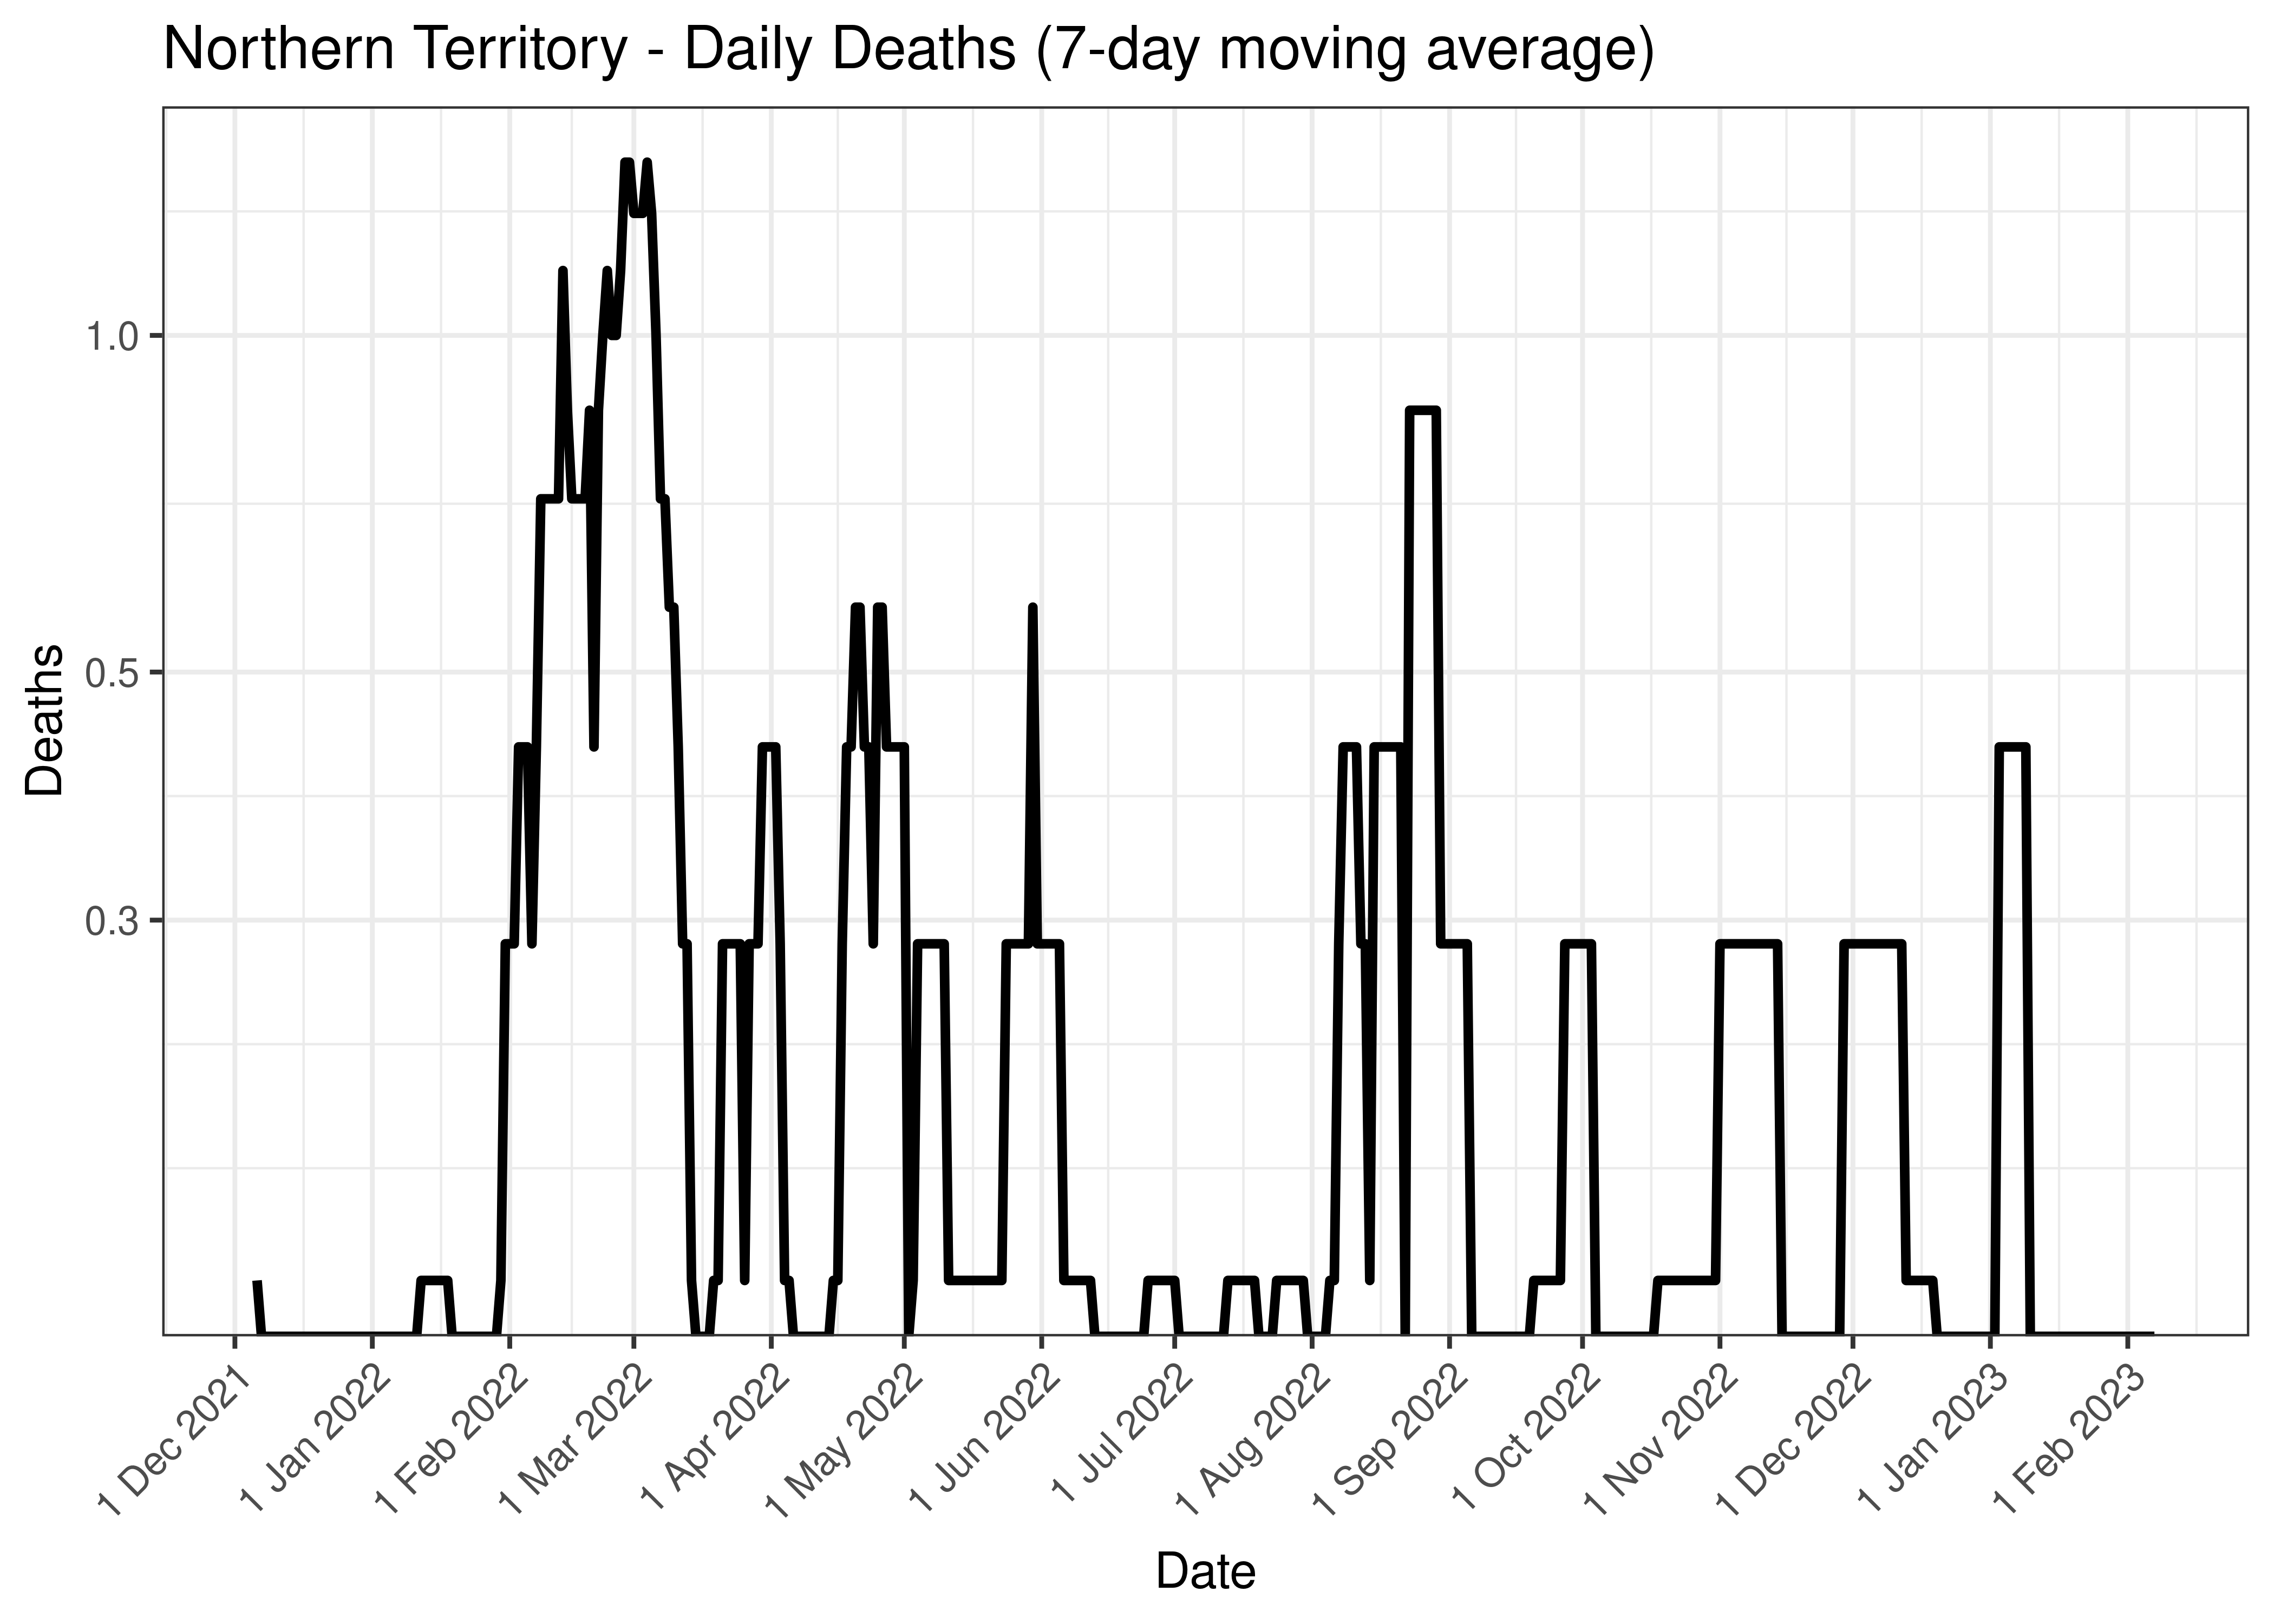 Northern Territory - Daily Deaths (7-day moving average)